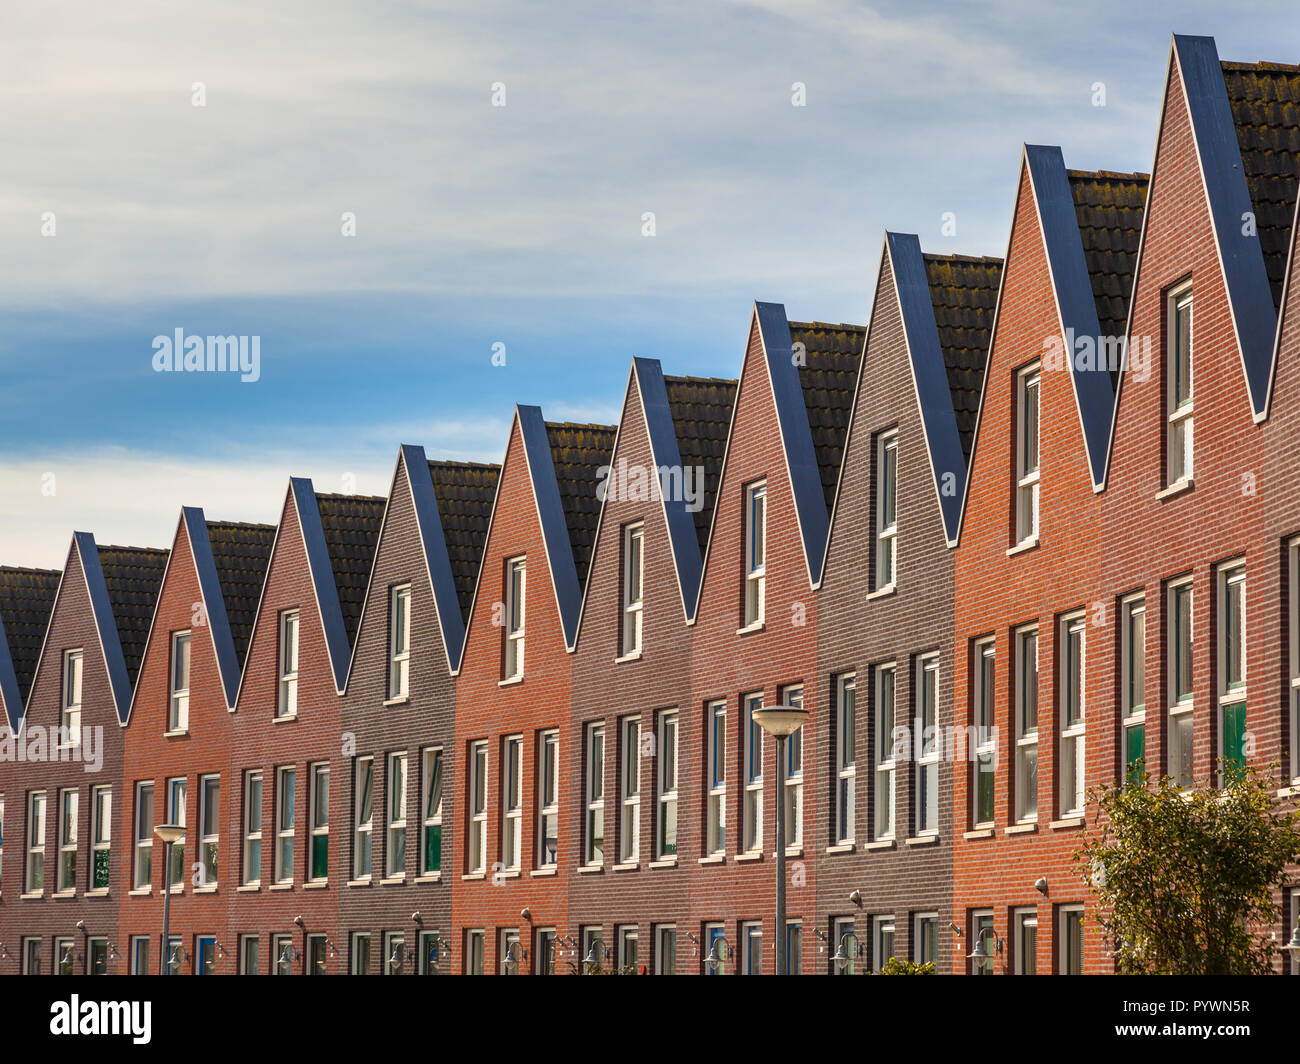 Facades of Modern Real Estate Family houses in a row Stock Photo